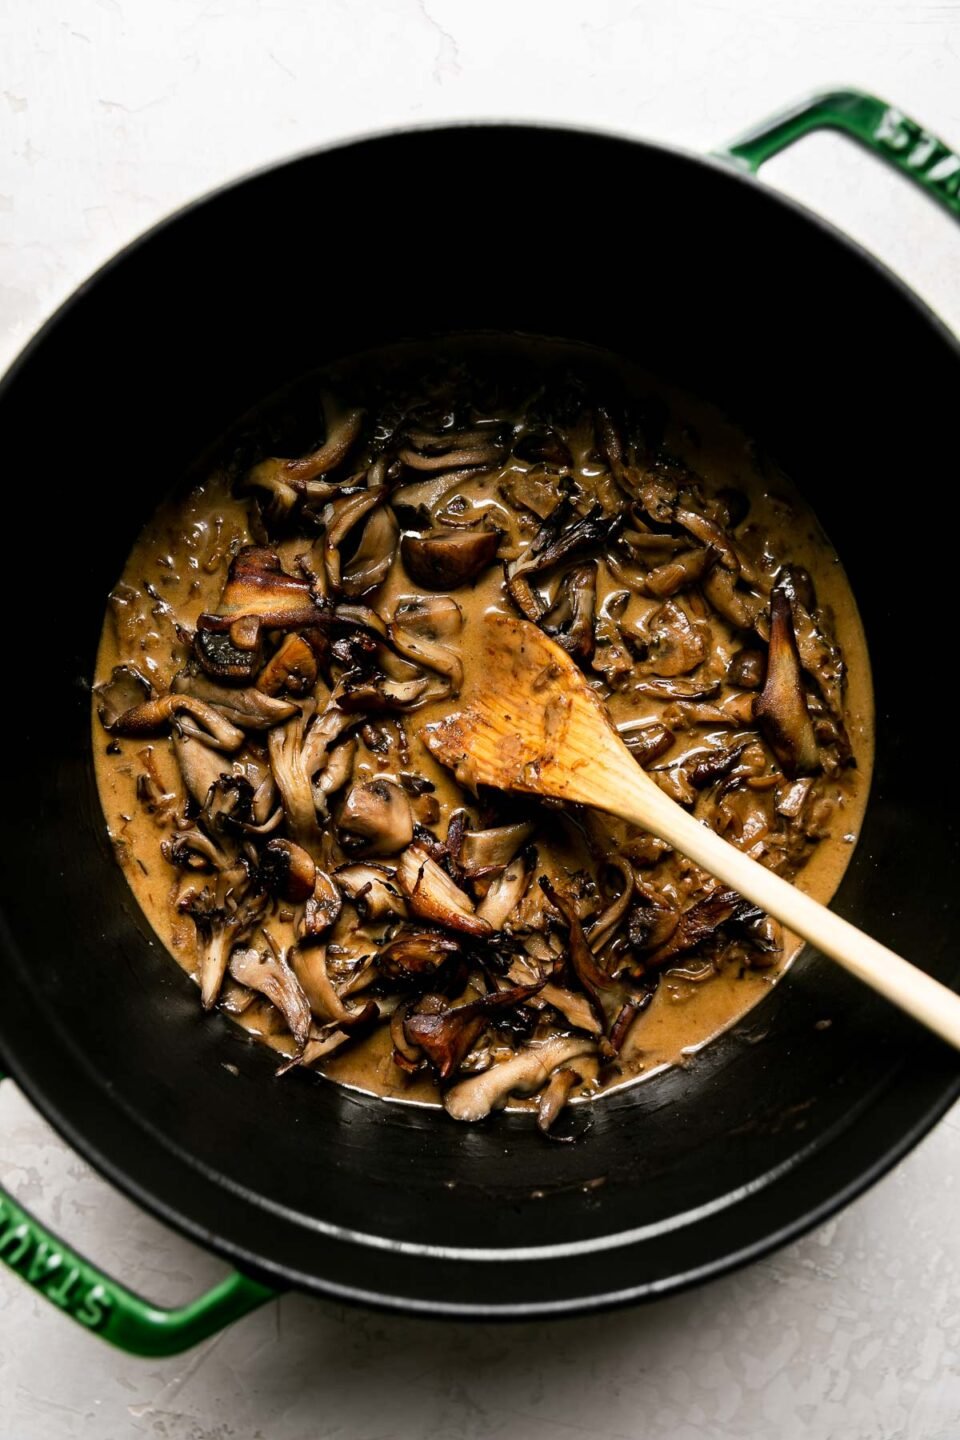 How to make mushroom ragu sauce, step 6: build & simmer the mushroom ragu. A porcini-infused stock rests inside of a green Staub cocotte. Heavy cream & browned fresh mushrooms are added to the pot & a wooden spoon rests inside of the pot to help build the mushroom ragu. The cocotte sits atop a creamy textured surface.